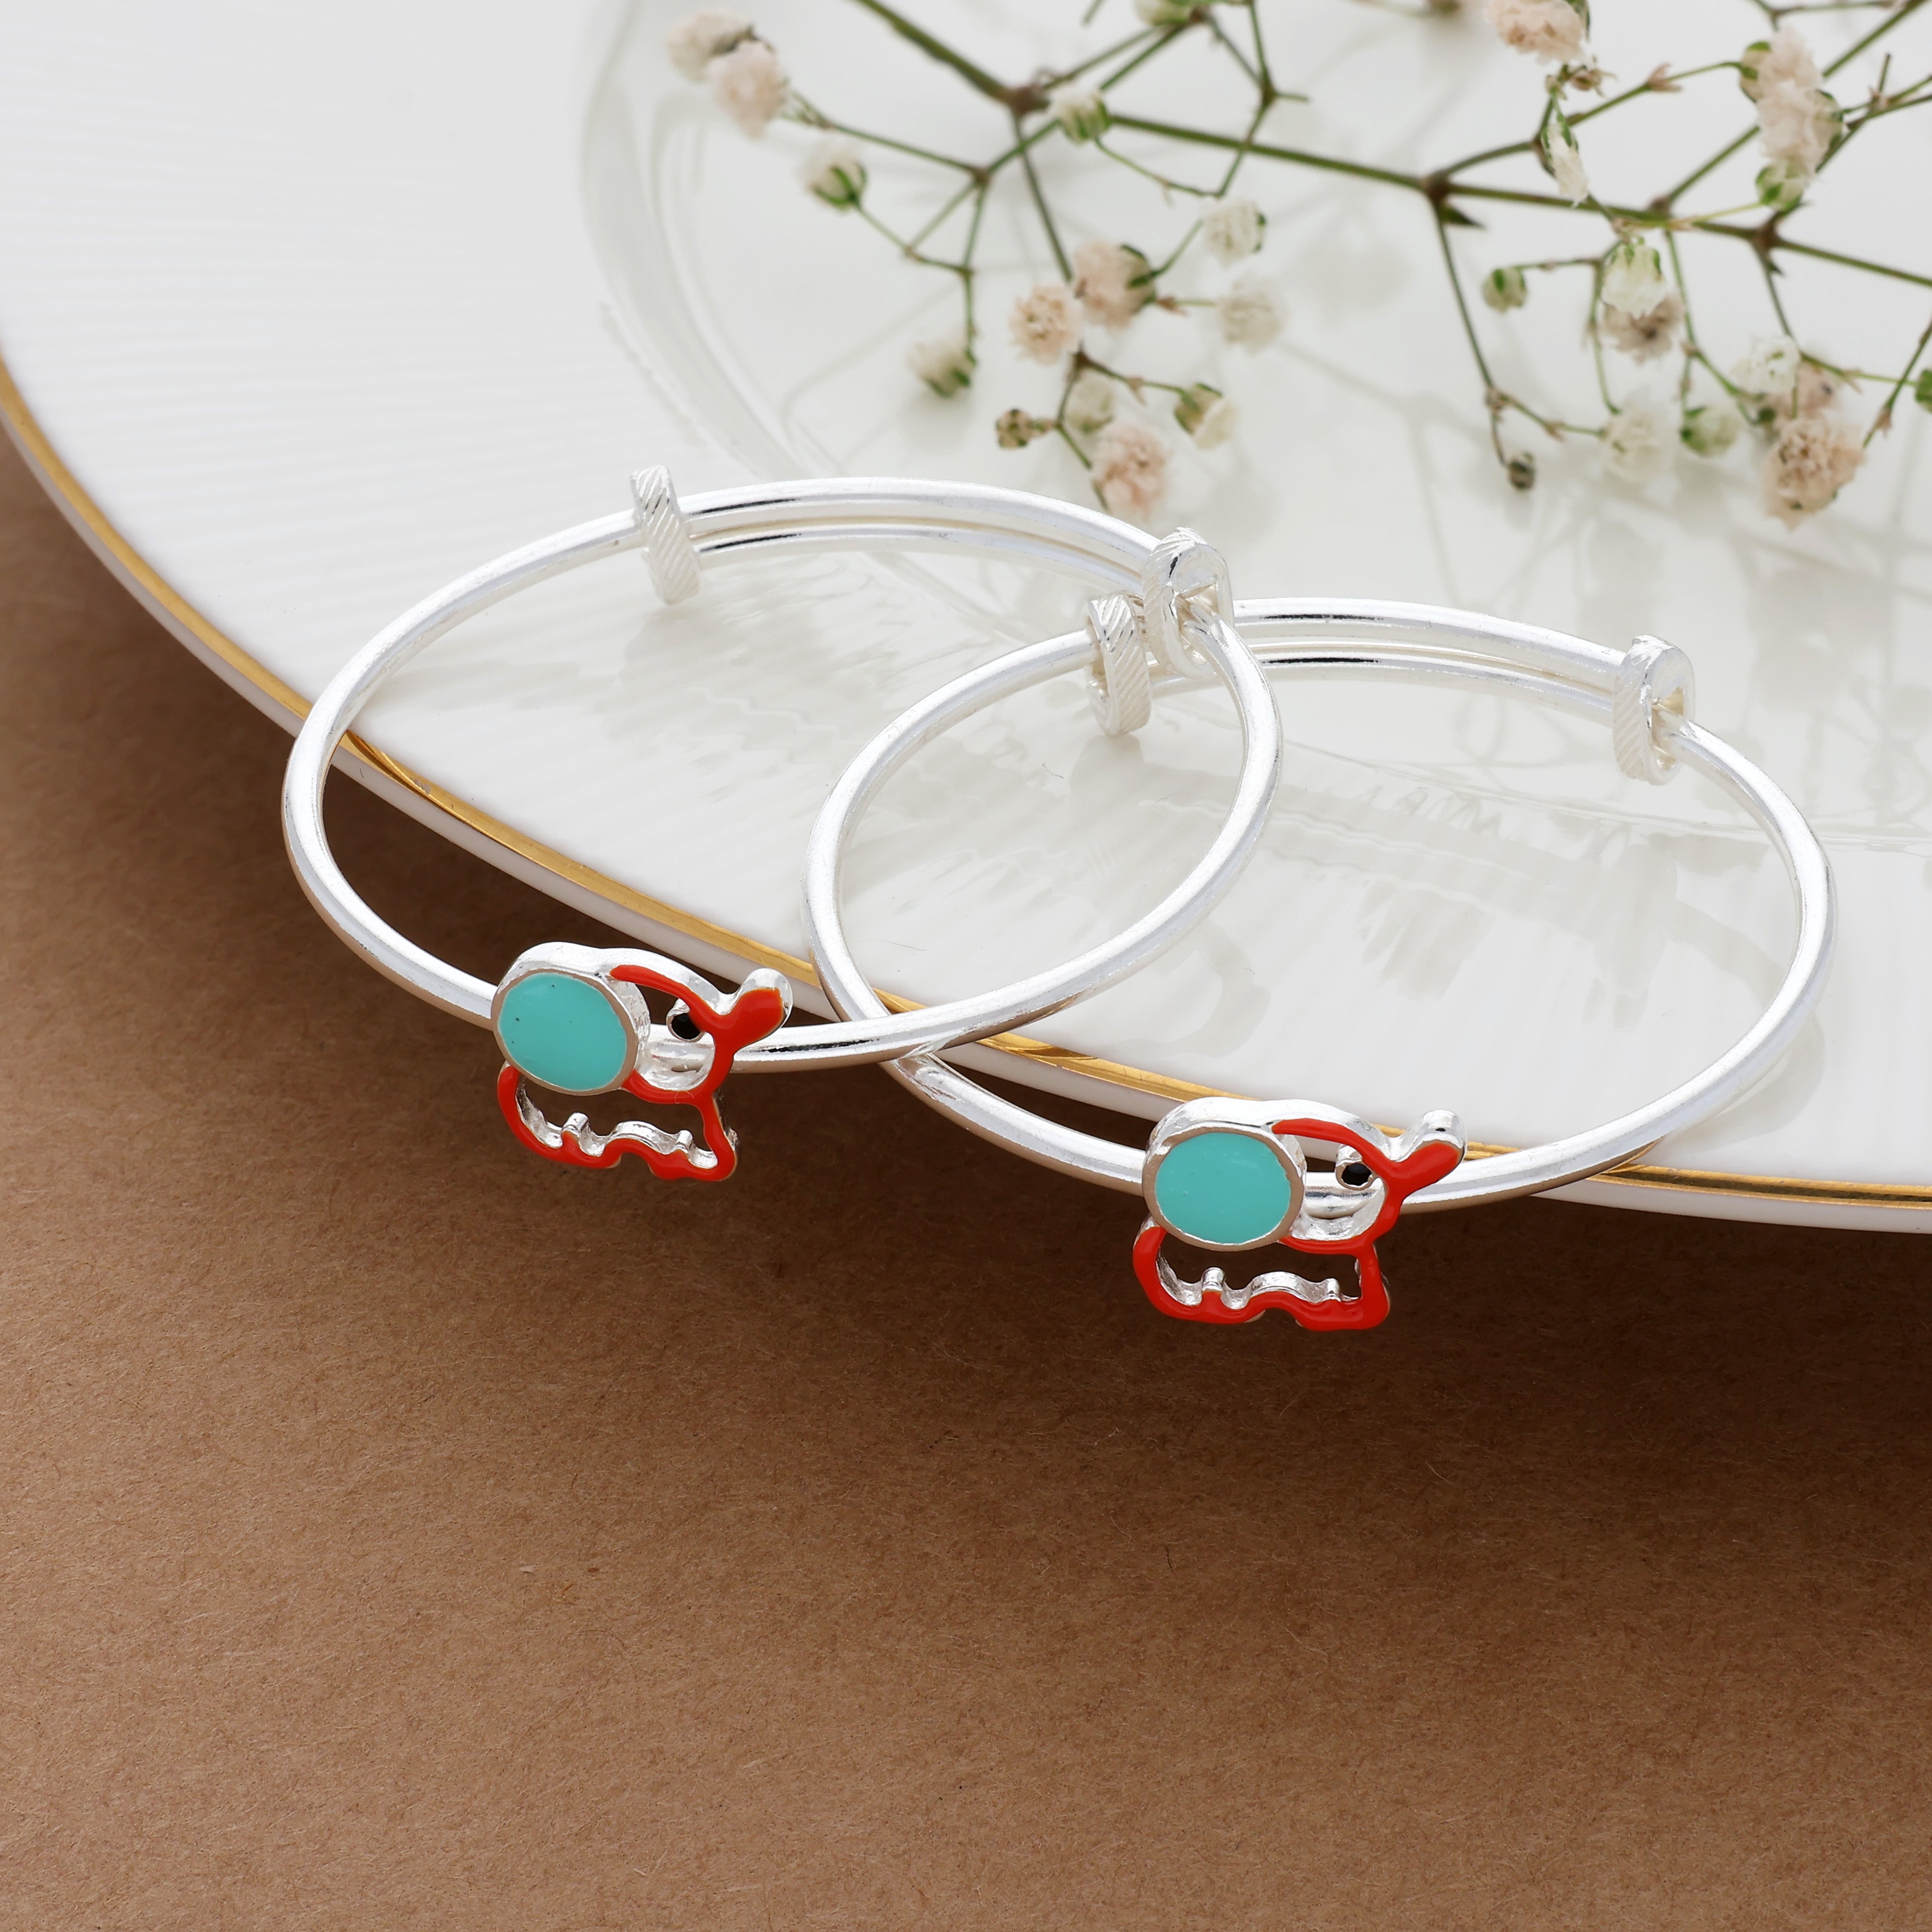 adjustable sterling silver bangle with elephant design for kids from 0 to 5 years